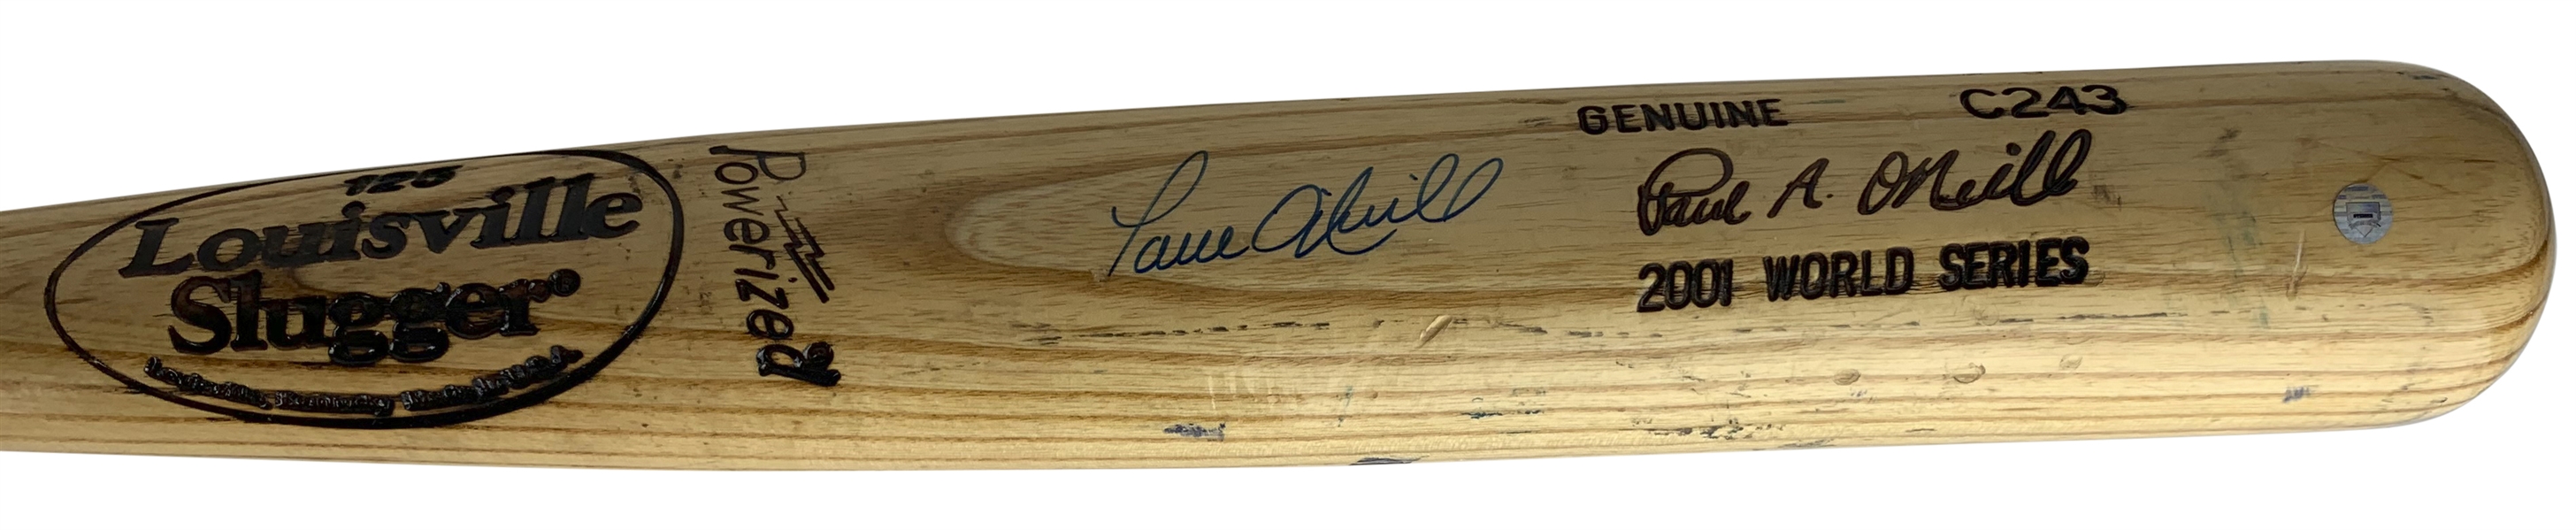 Paul ONeill Signed & Game Used 2001 World Series C243 Baseball Bat-Possibly The Last Bat of His Career! (PSA/DNA 10!)